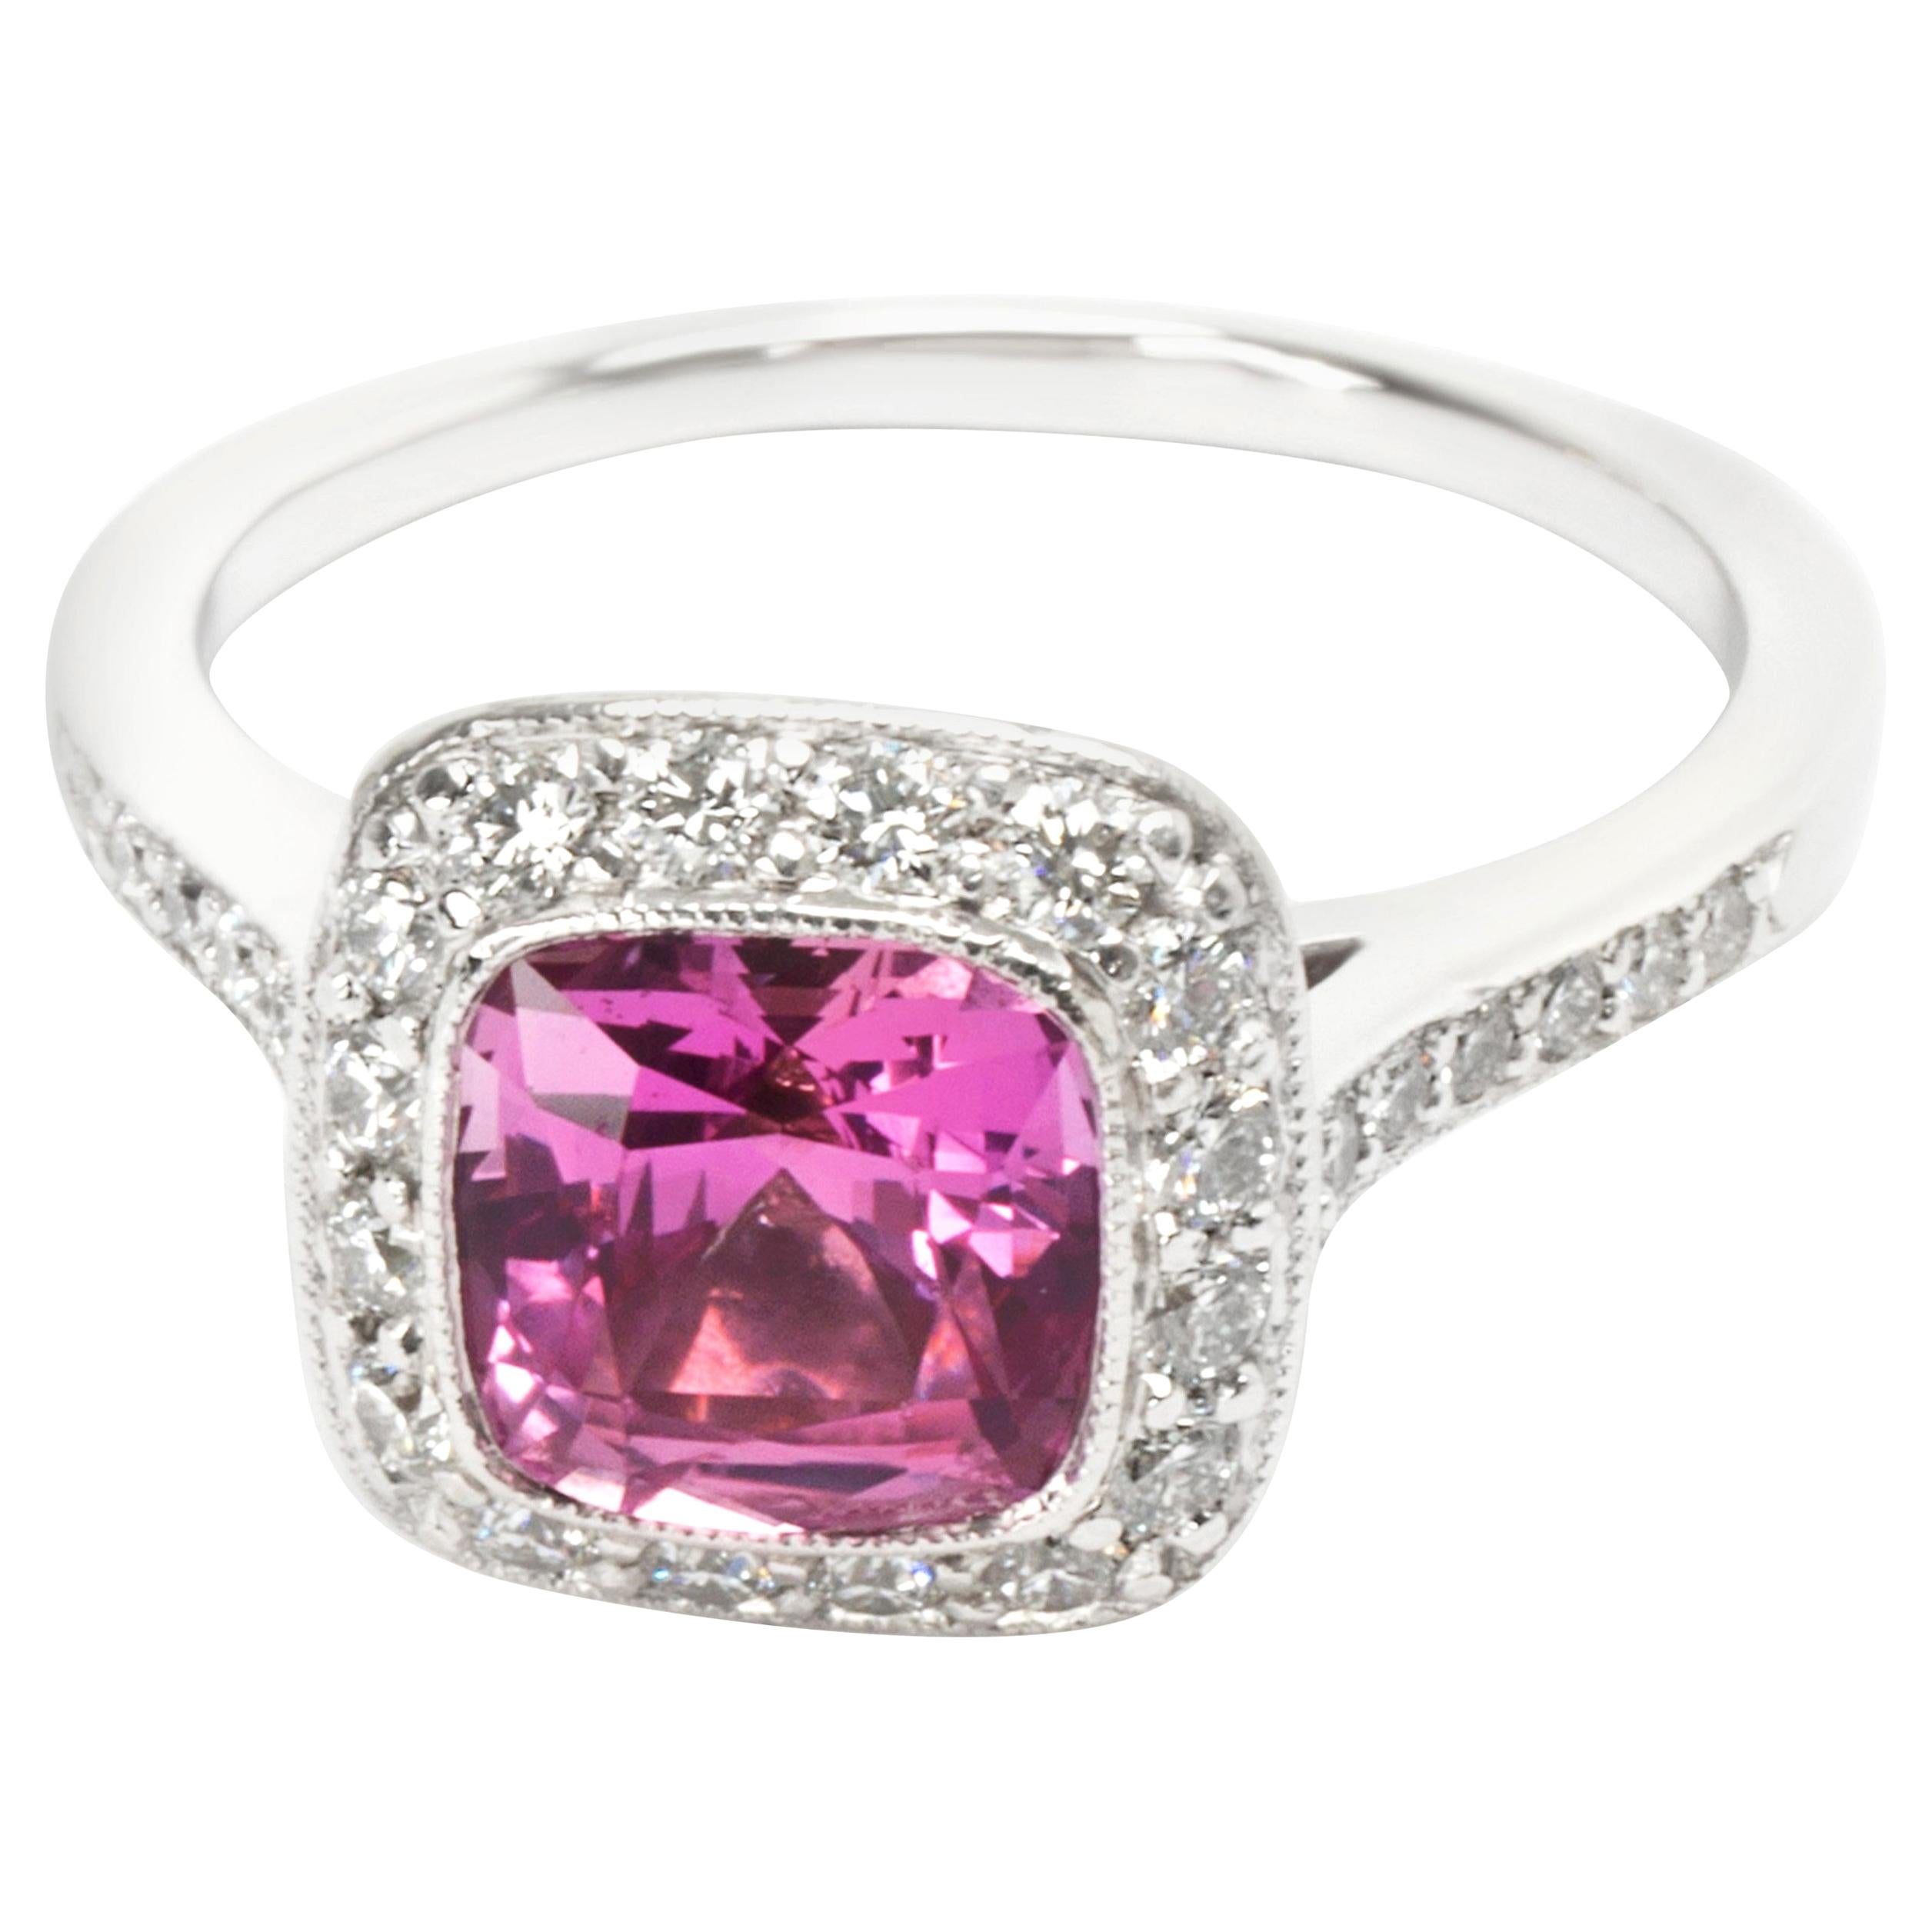 Tiffany & Co. Legacy Pink Sapphire and Diamond Ring in Platinum 0.54 Carat